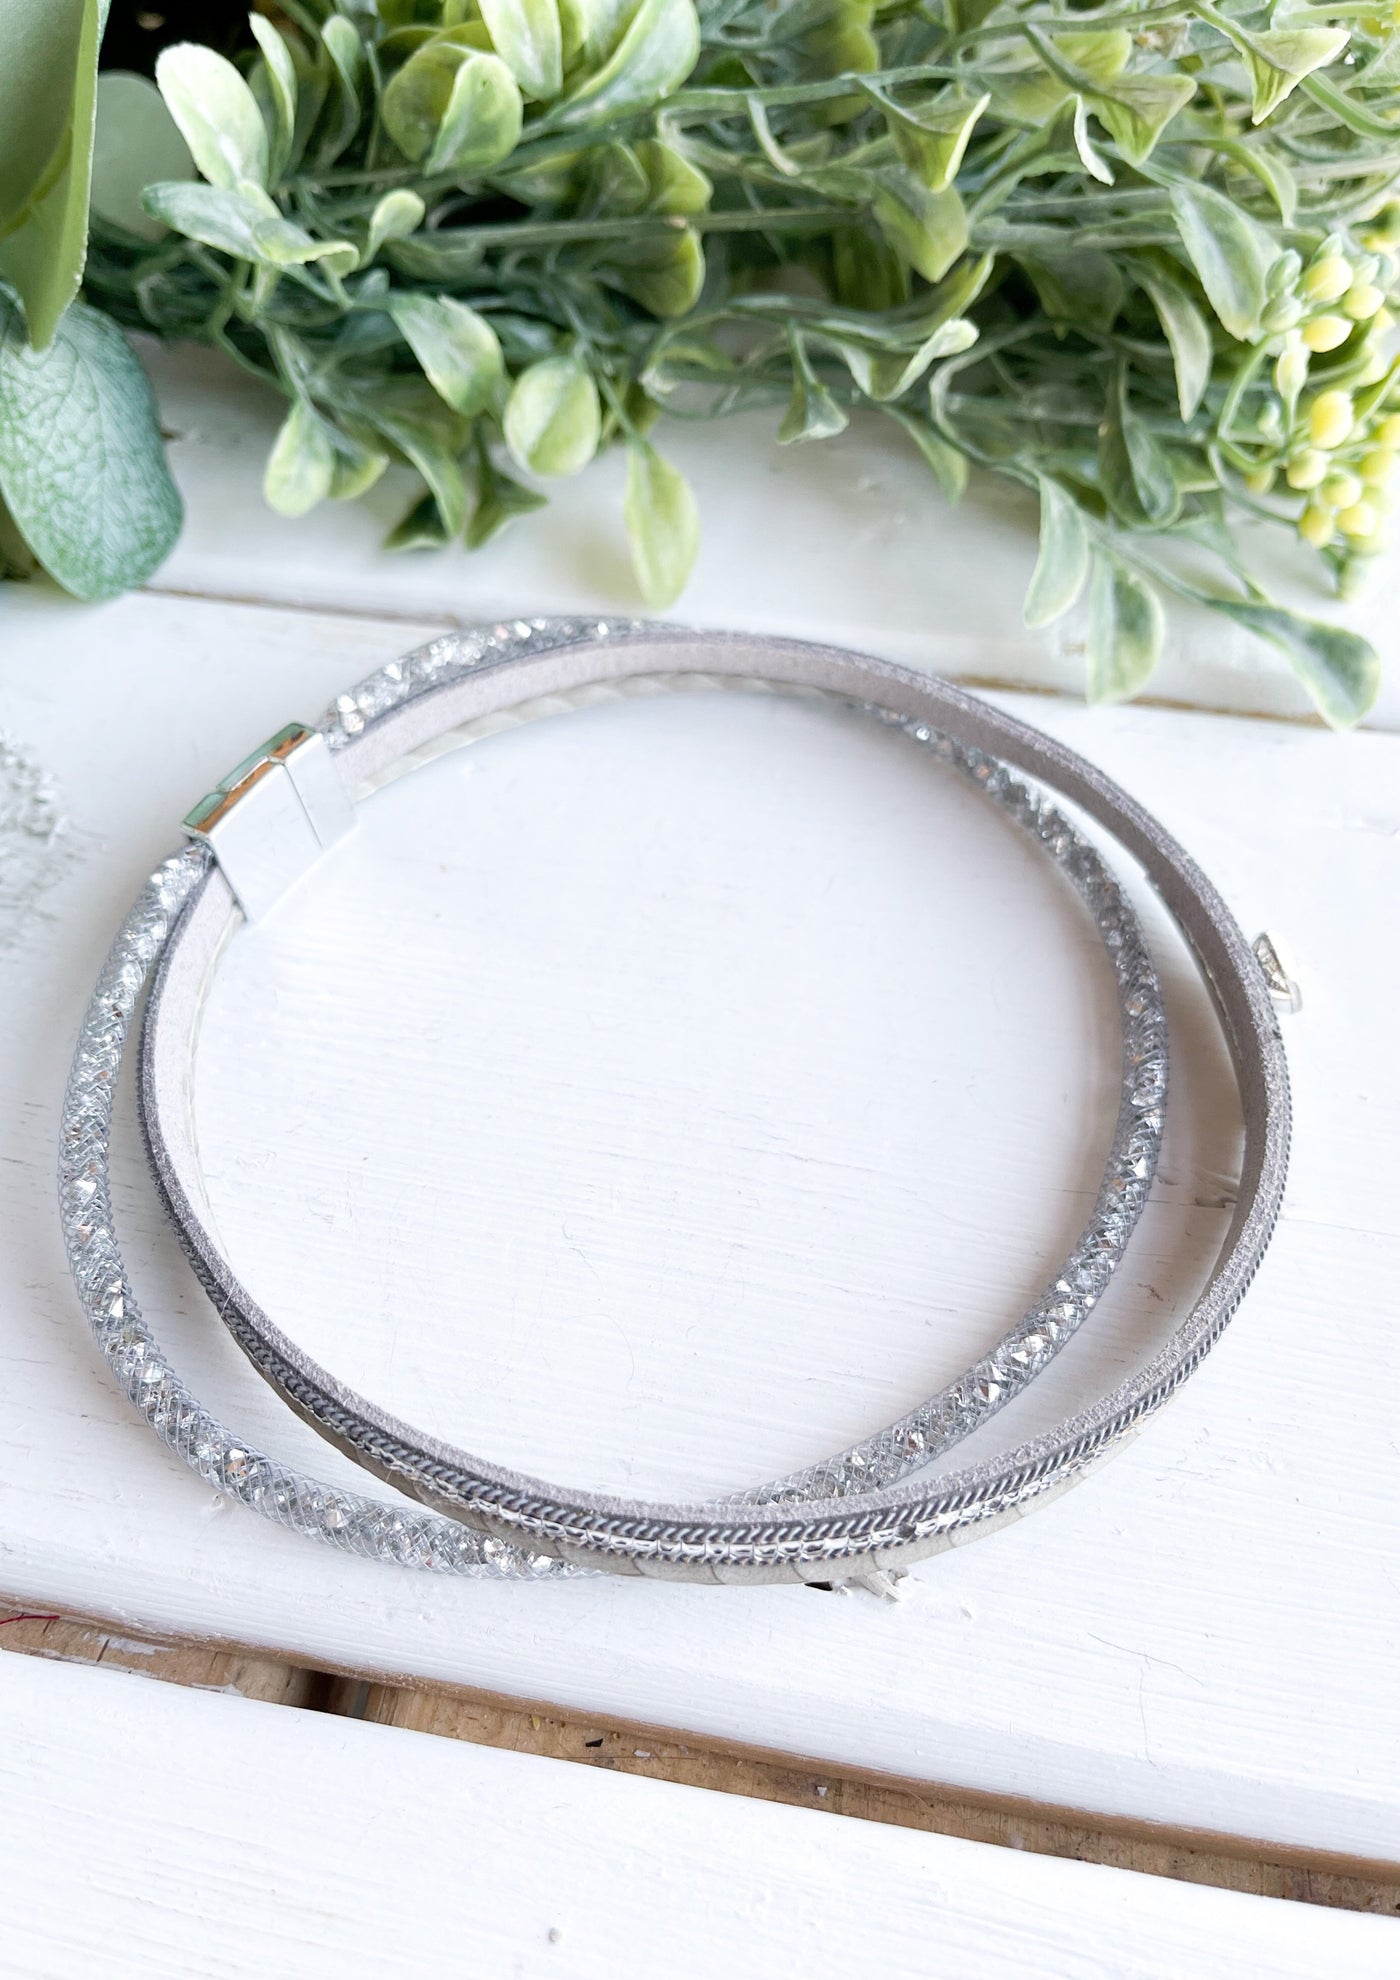 Disco Double Wrap Bracelet With Grey Crystals